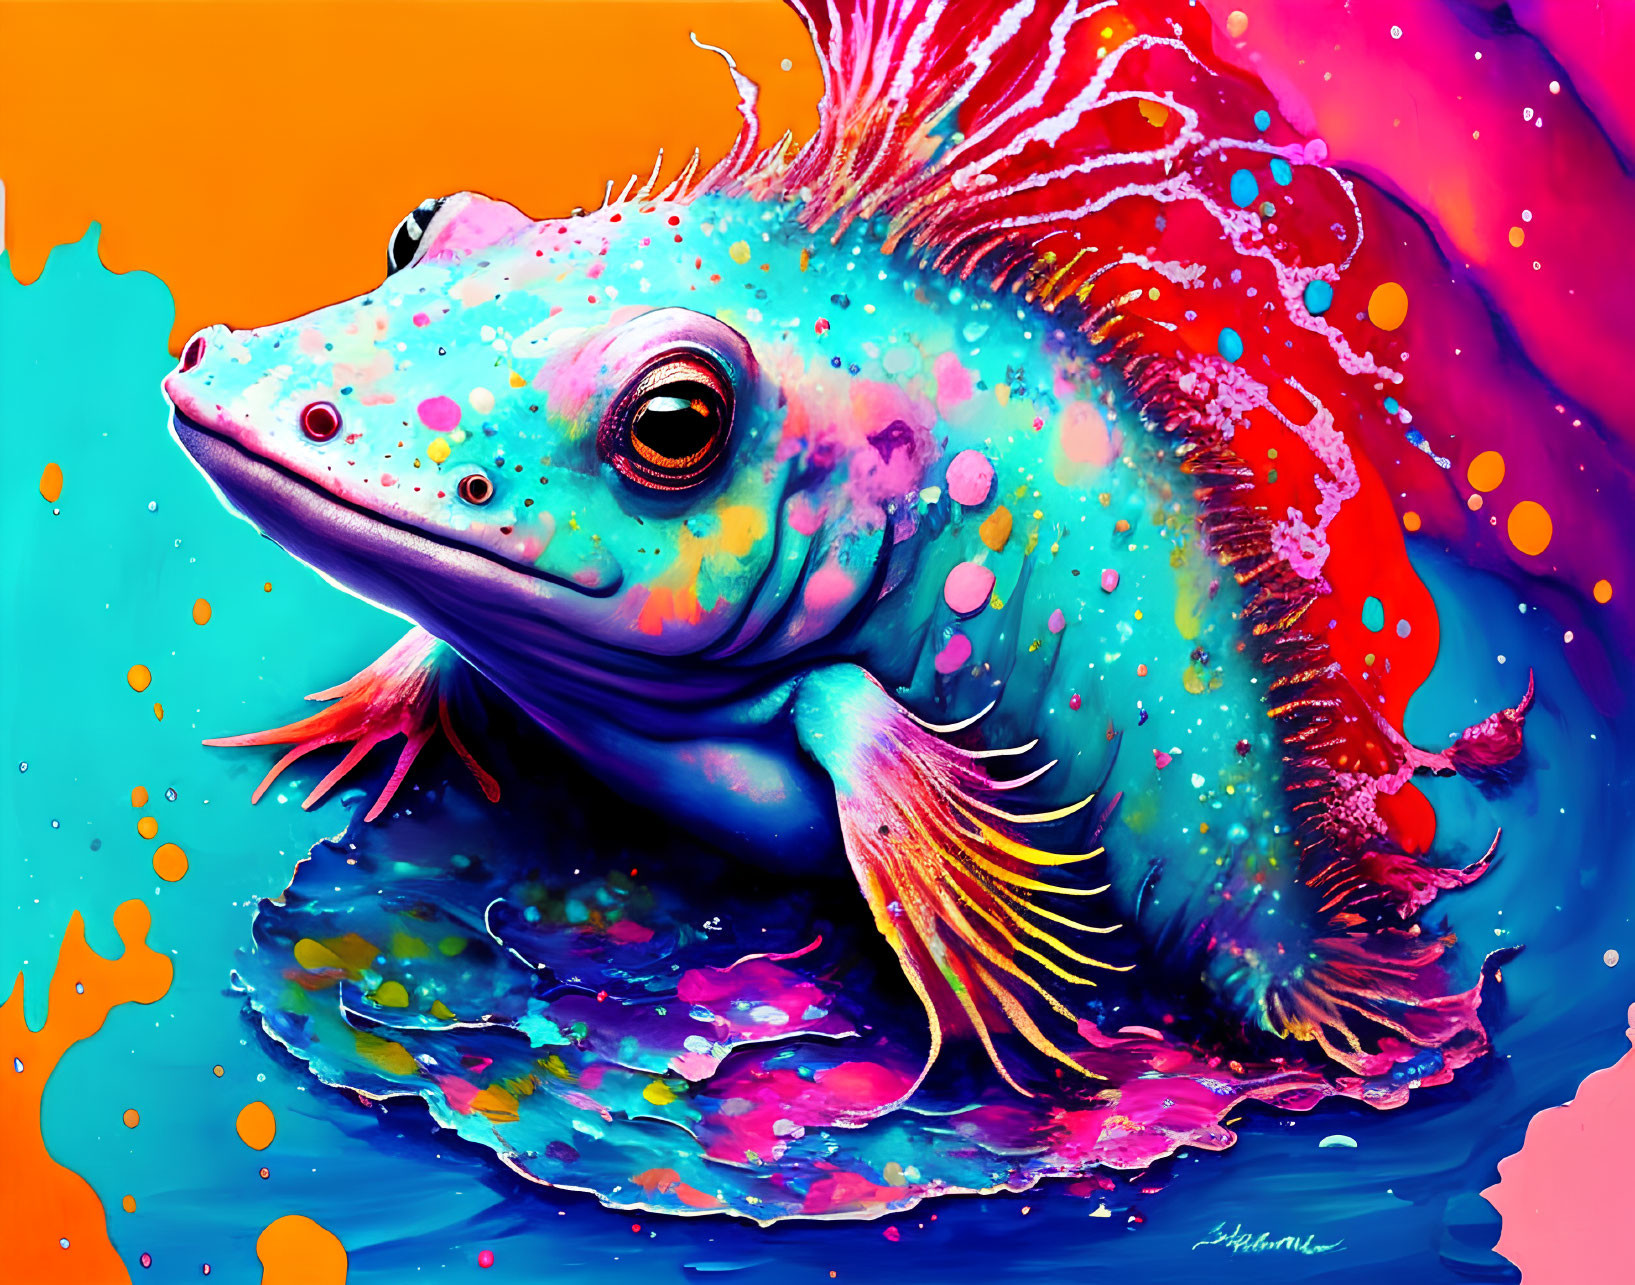 Colorful digital artwork of a fantastical fish with intricate patterns